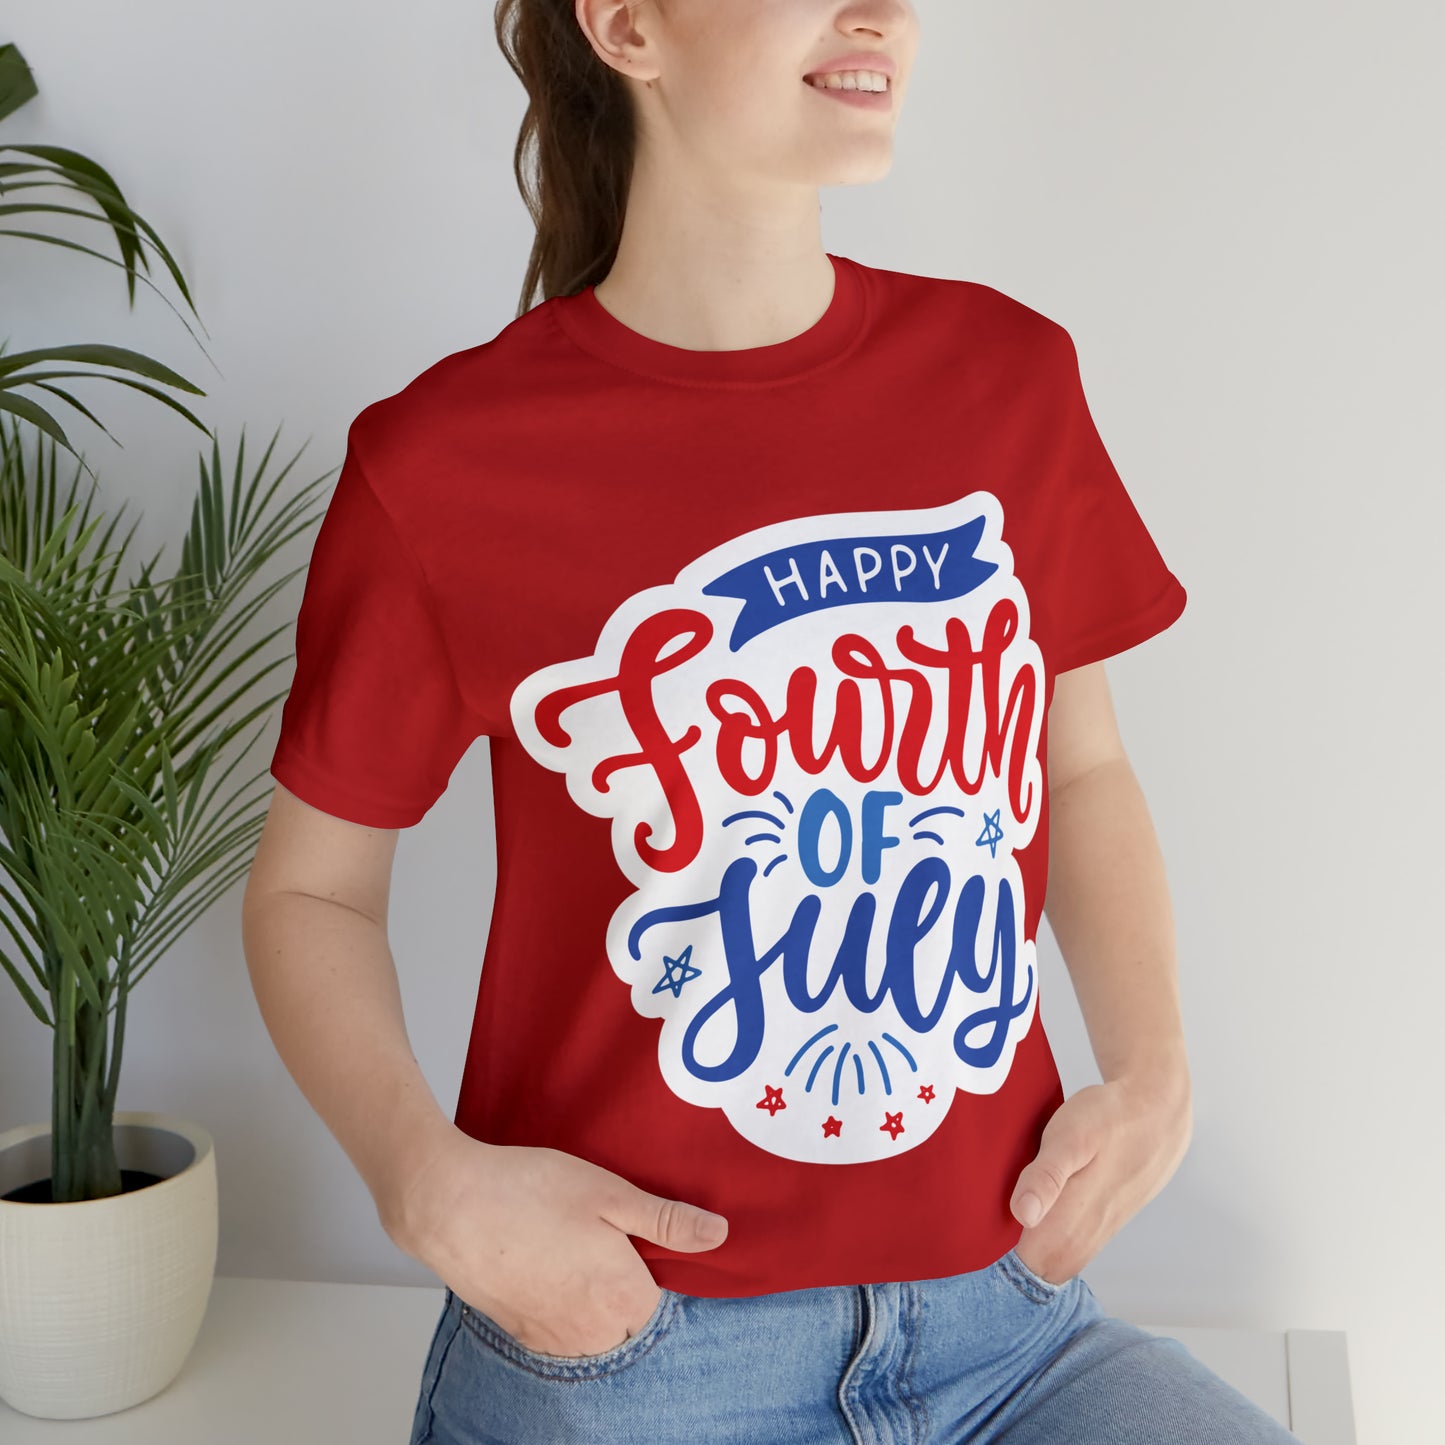 Red T-Shirt Tshirt Design Gift for Friend and Family Short Sleeved Shirt July 4th Independence Day Petrova Designs